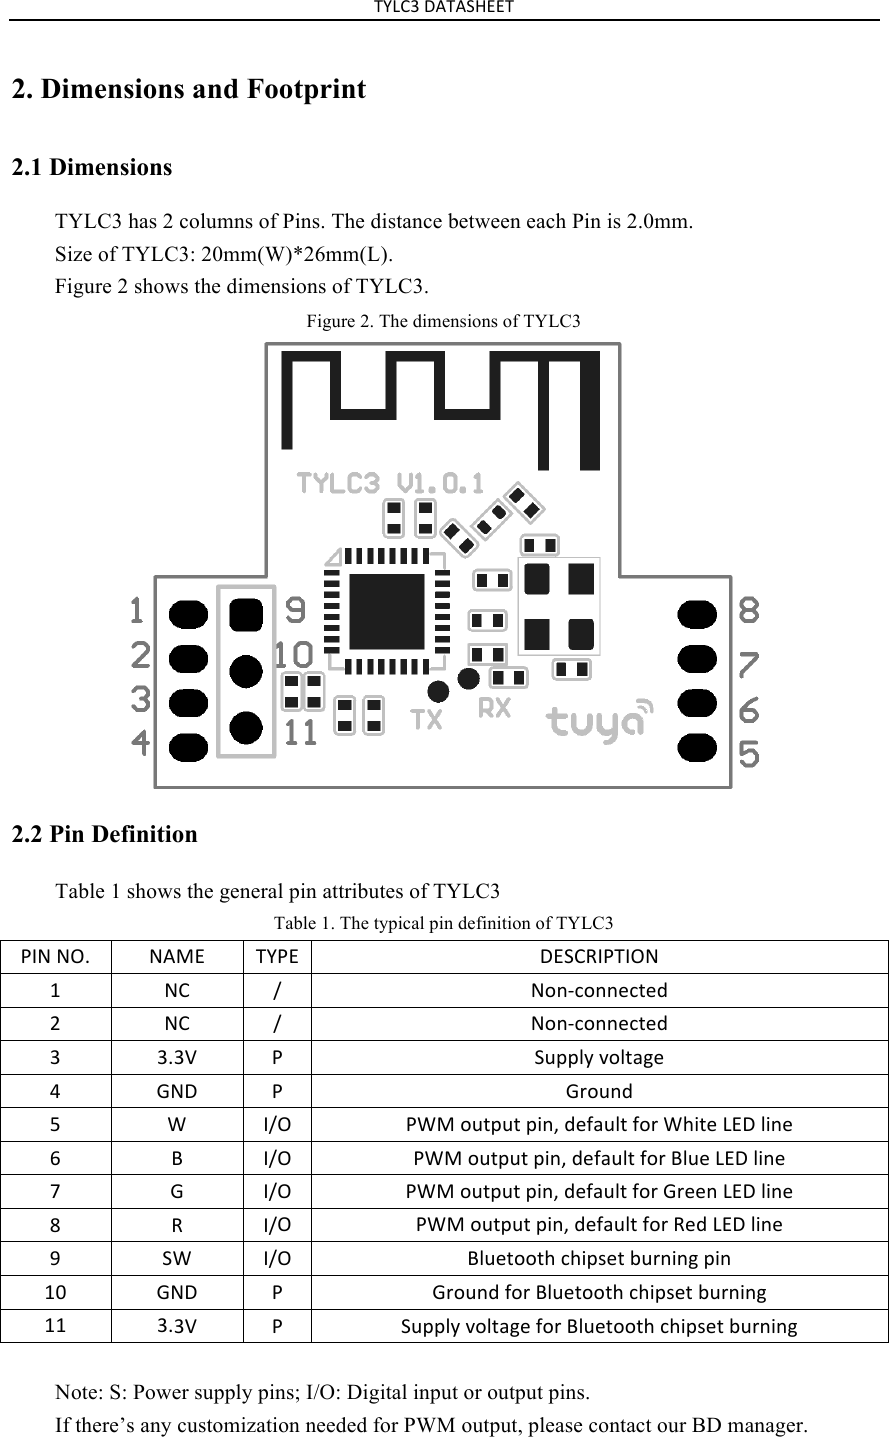 TYLC3&amp;DATASHEET&amp;2. Dimensions and Footprint2.1 Dimensions TYLC3 has 2 columns of Pins. The distance between each Pin is 2.0mm. Size of TYLC3: 20mm(W)*26mm(L). Figure 2 shows the dimensions of TYLC3. Figure 2. The dimensions of TYLC3 2.2 Pin Definition Table 1 shows the general pin attributes of TYLC3 Table 1. The typical pin definition of TYLC3 PIN&amp;NO.&amp;NAME&amp;TYPE&amp;DESCRIPTION&amp;1&amp; NC&amp; /&amp; Non-connected&amp;2&amp; NC&amp; /&amp; Non-connected&amp;3&amp; 3.3V&amp; P&amp; Supply&amp;voltage&amp;4&amp; GND&amp; P&amp; Ground&amp;5&amp; W&amp; I/O&amp;PWM&amp;output&amp;pin,&amp;default&amp;for&amp;White&amp;LED&amp;line&amp;6&amp; B&amp; I/O&amp;PWM&amp;output&amp;pin,&amp;default&amp;for&amp;Blue&amp;LED&amp;line&amp;7&amp; G&amp; I/O&amp;PWM&amp;output&amp;pin,&amp;default&amp;for&amp;Green&amp;LED&amp;line&amp;8&amp; R&amp; I/O&amp;PWM&amp;output&amp;pin,&amp;default&amp;for&amp;Red&amp;LED&amp;line&amp;9&amp; SW&amp;I/O&amp;Bluetooth&amp;chipset&amp;burning&amp;pin&amp;10&amp;GND&amp; P&amp; Ground&amp;for&amp;Bluetooth&amp;chipset&amp;burning&amp;11&amp;3.3V&amp; P&amp; Supply&amp;voltage&amp;for&amp;Bluetooth&amp;chipset&amp;burning&amp;Note: S: Power supply pins; I/O: Digital input or output pins. If there’s any customization needed for PWM output, please contact our BD manager. 